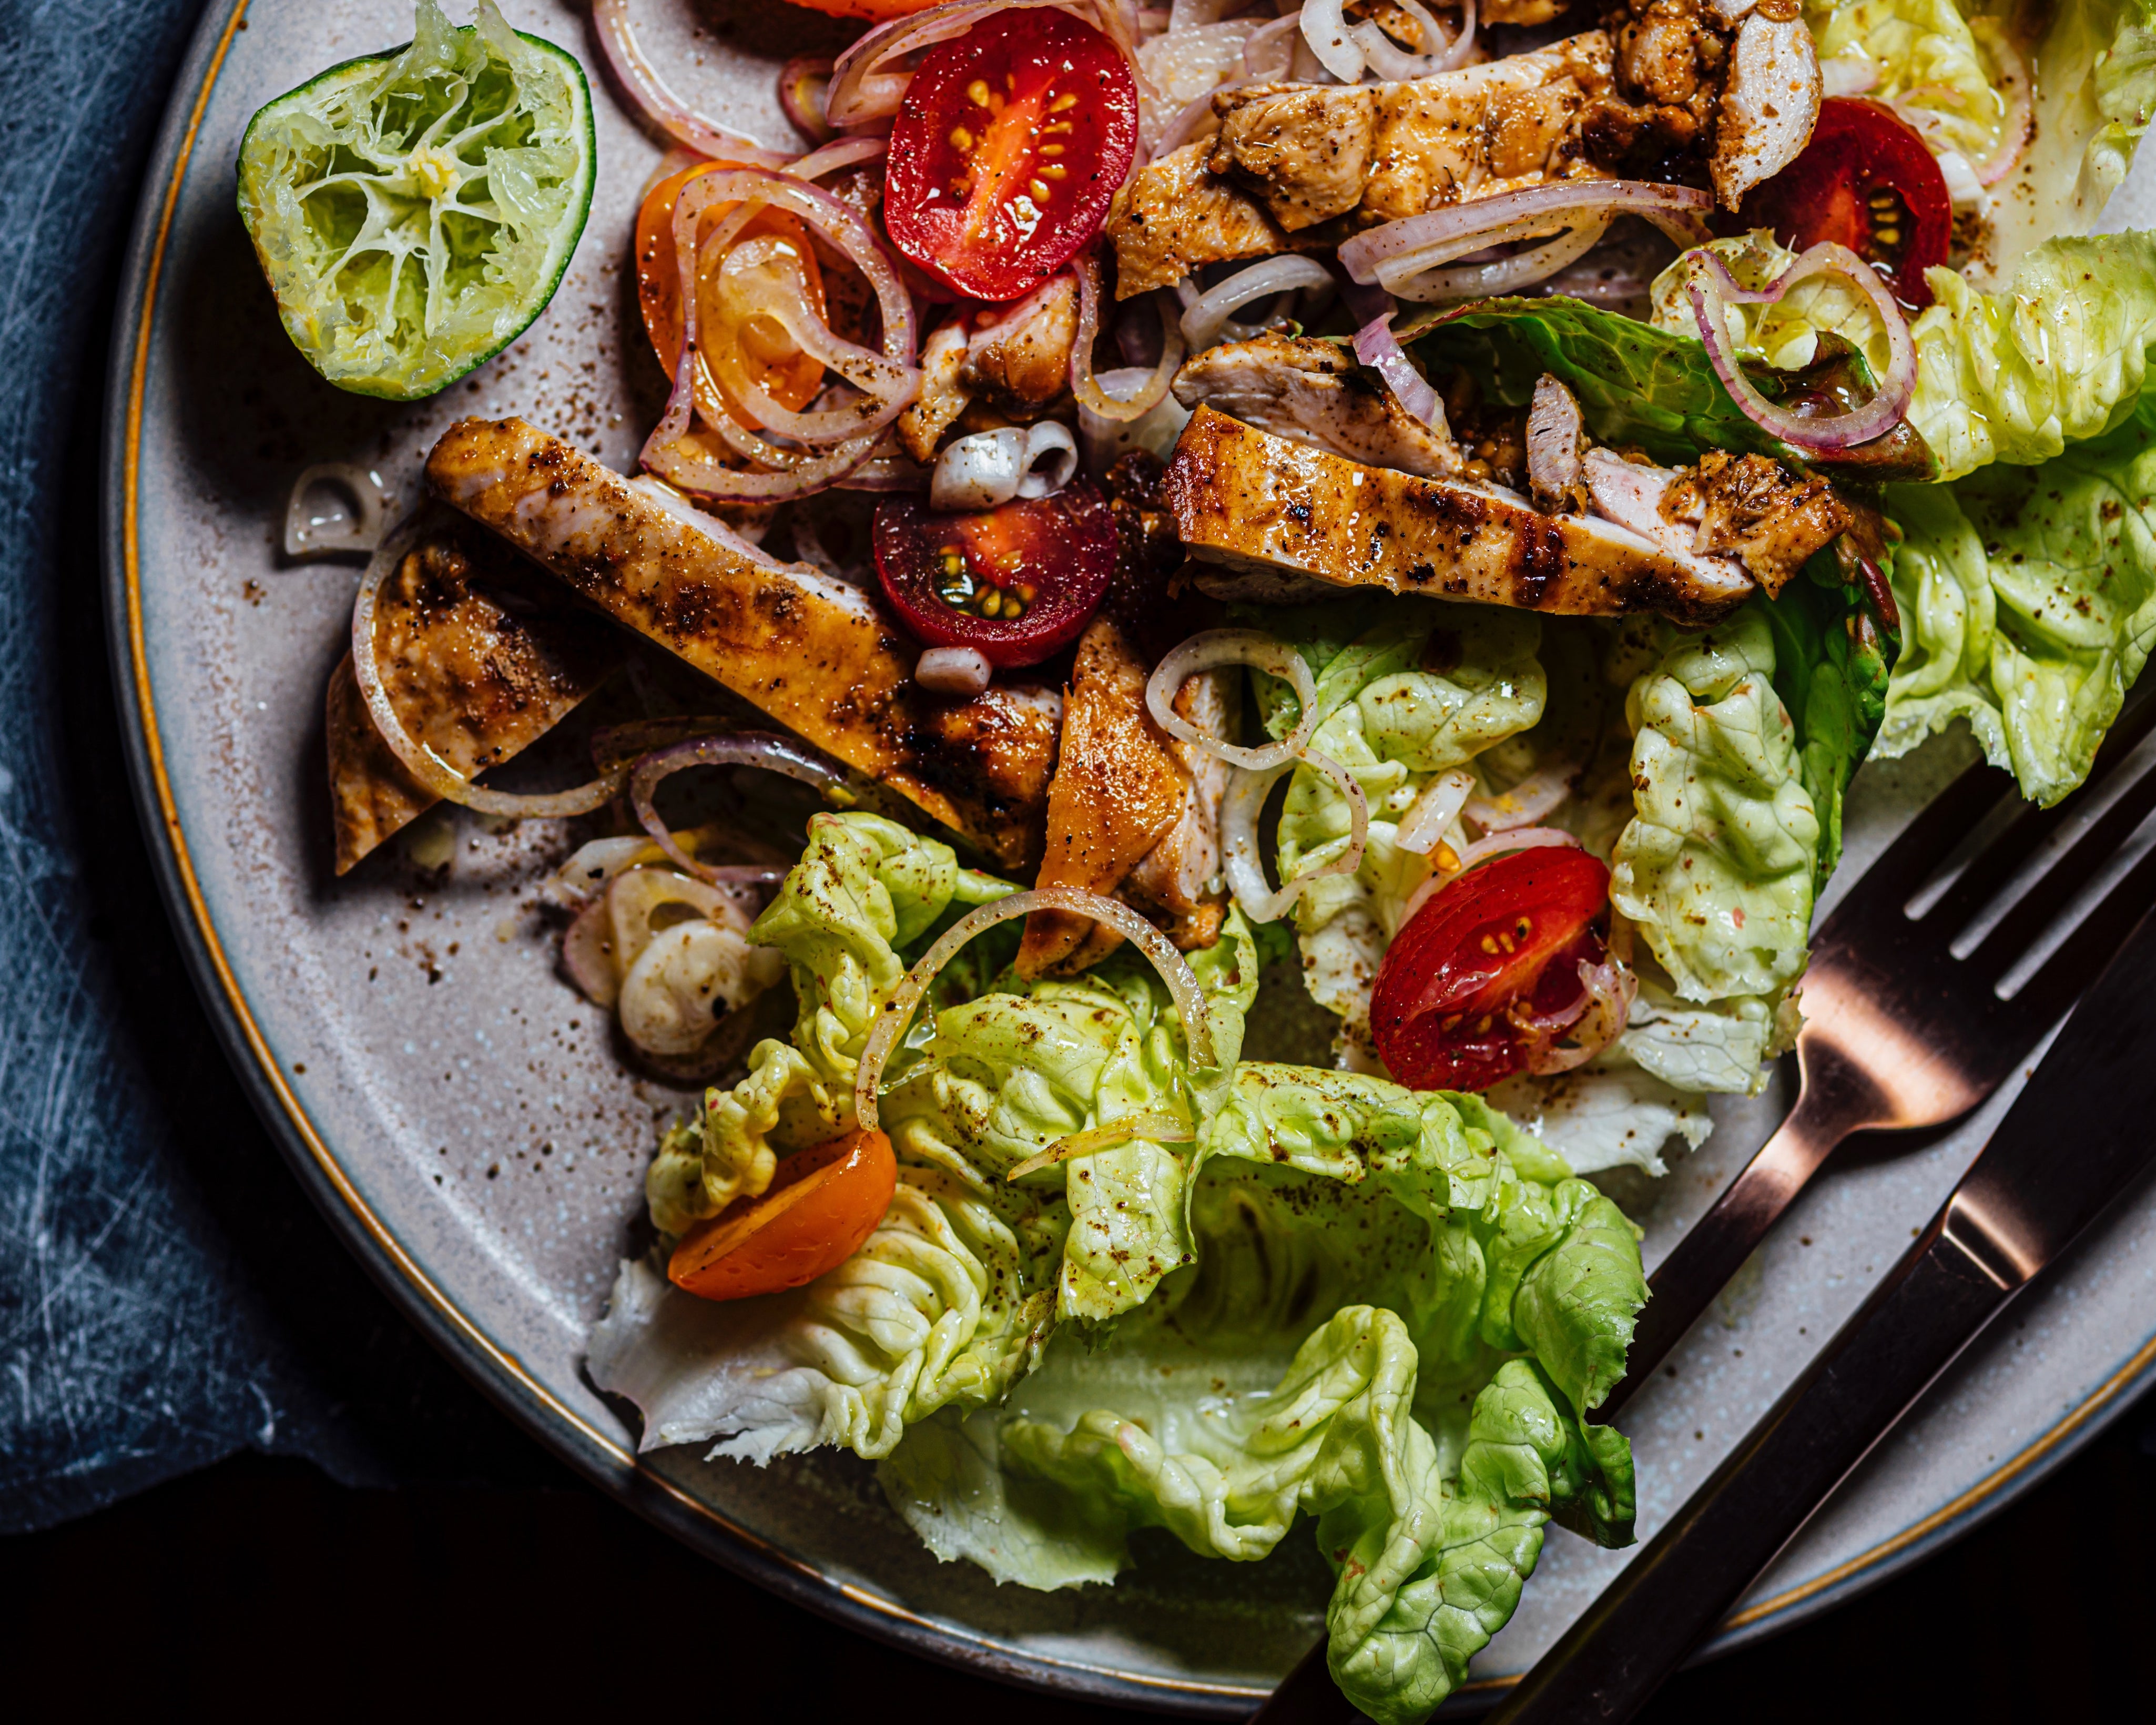 Grilled Spiced Chicken Salad with Amchur